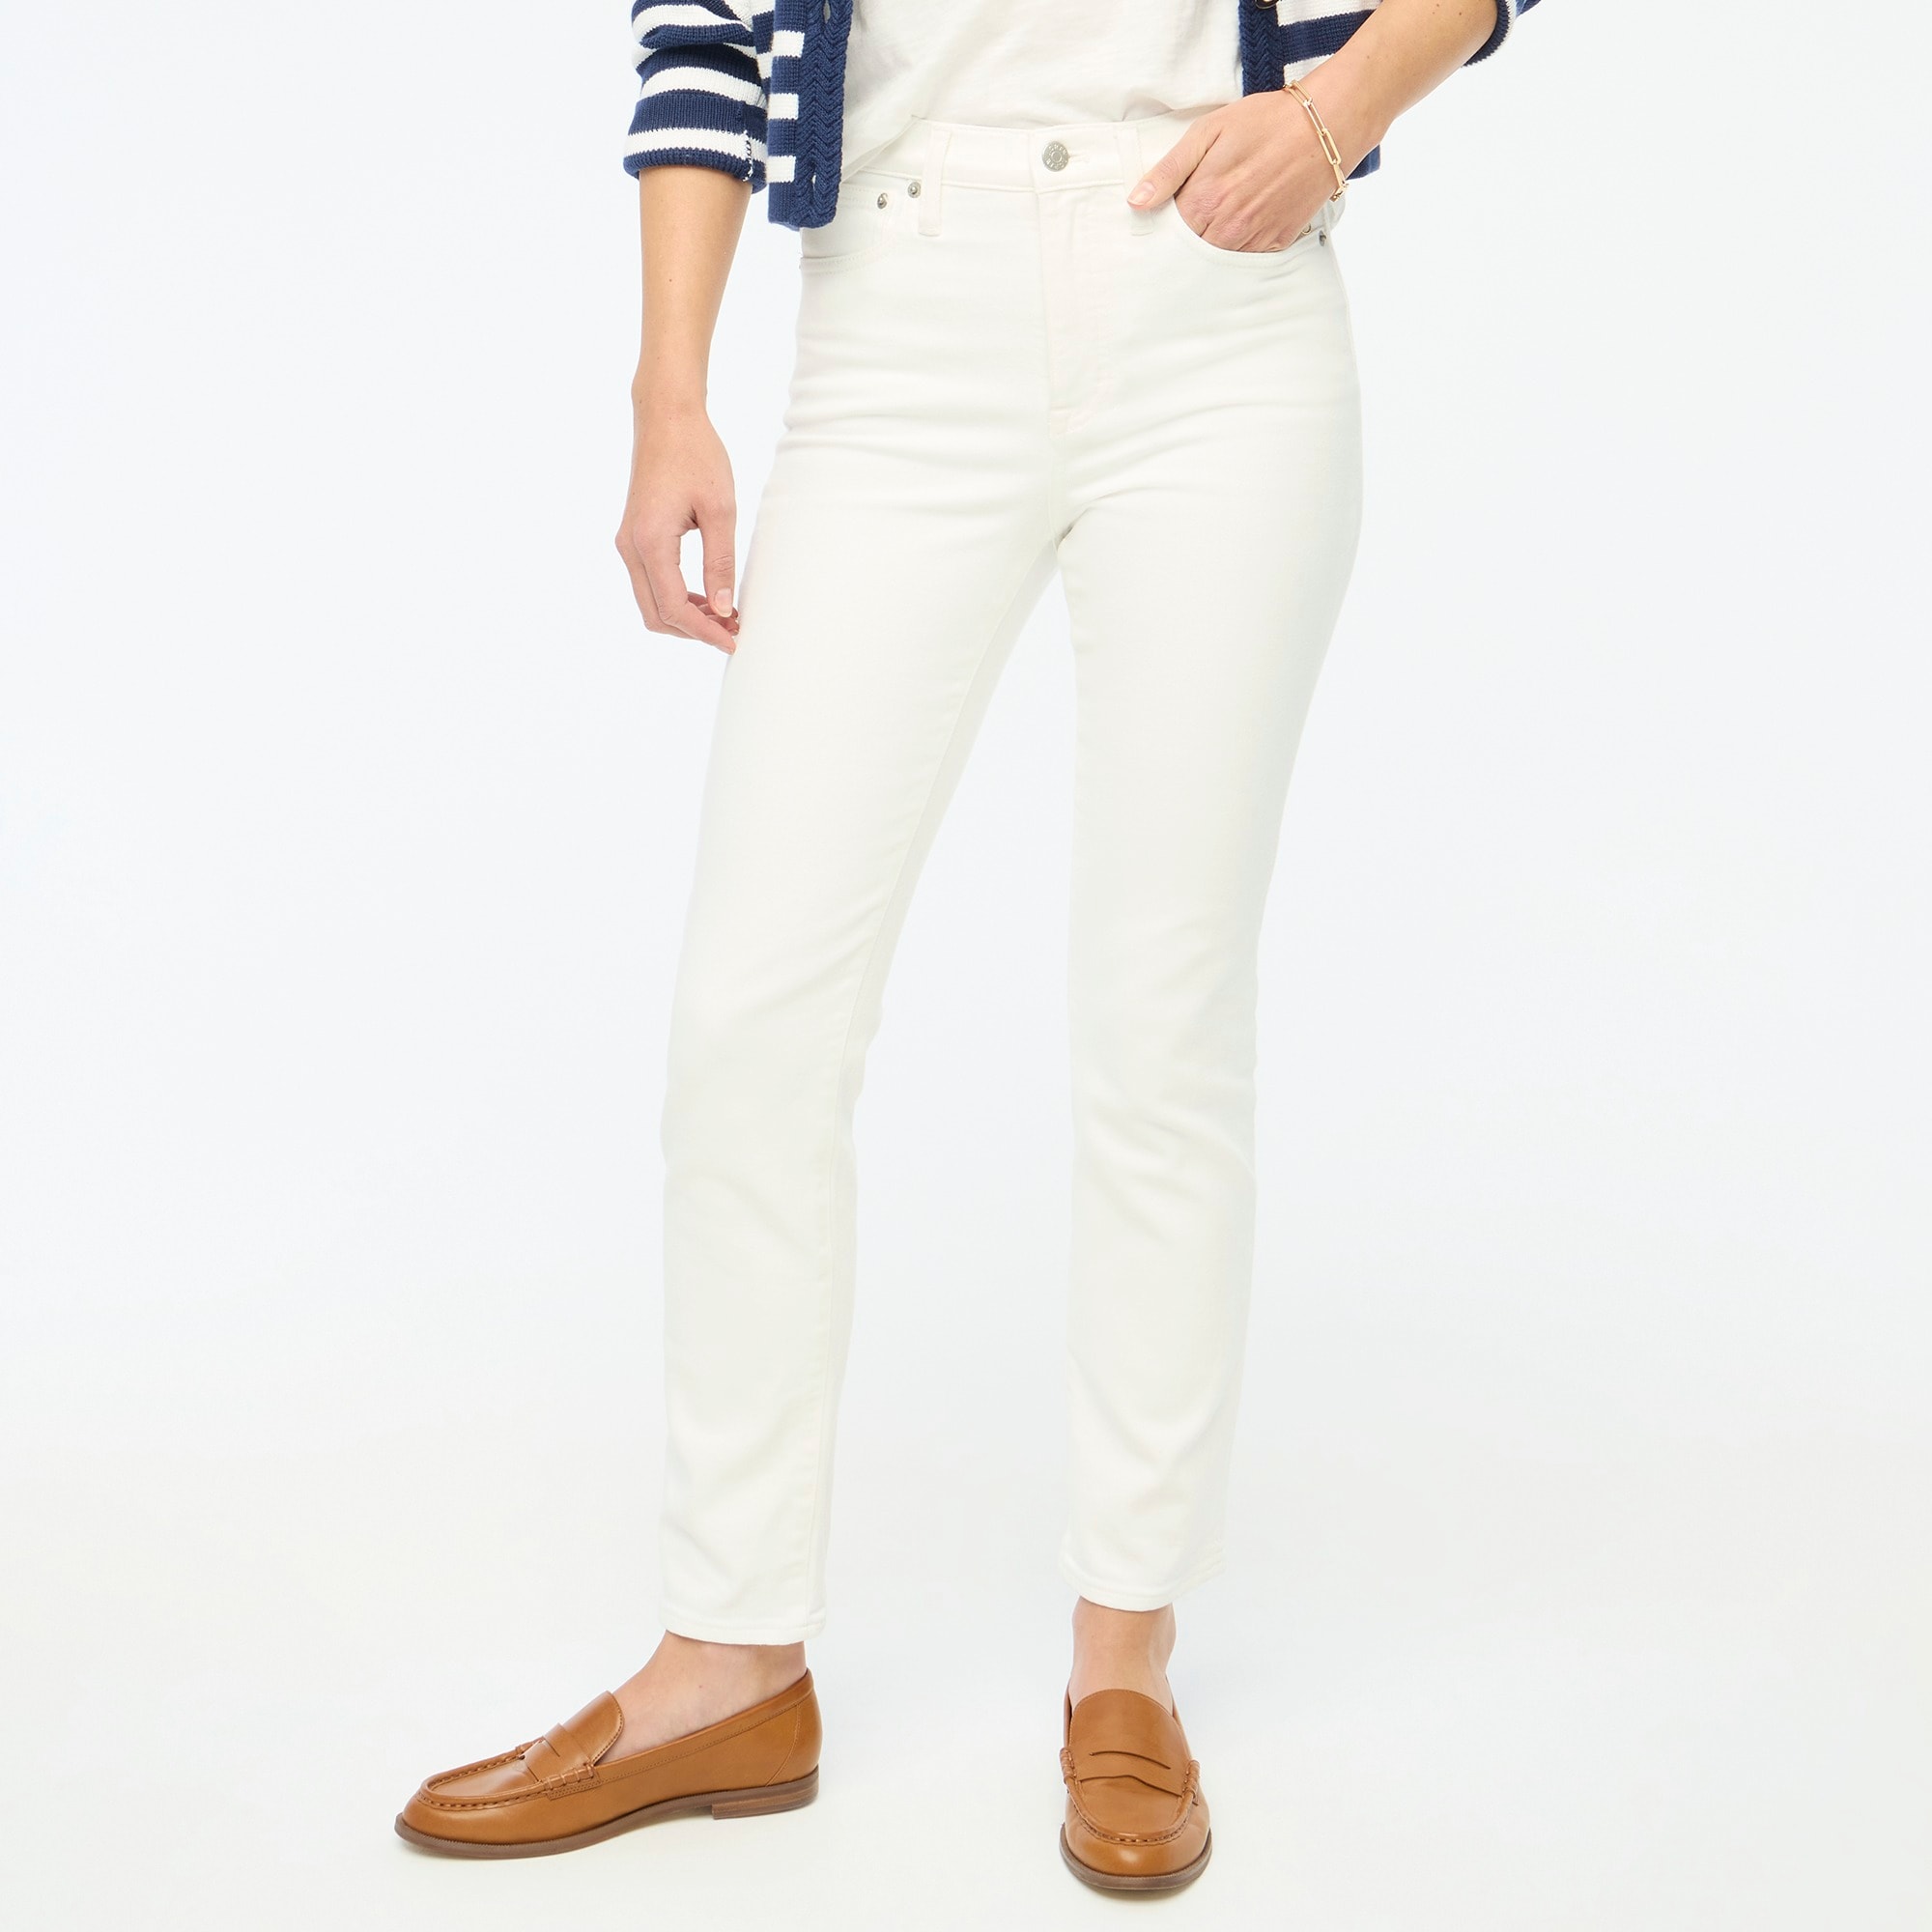 Jcrew Essential straight white jean in all-day stretch